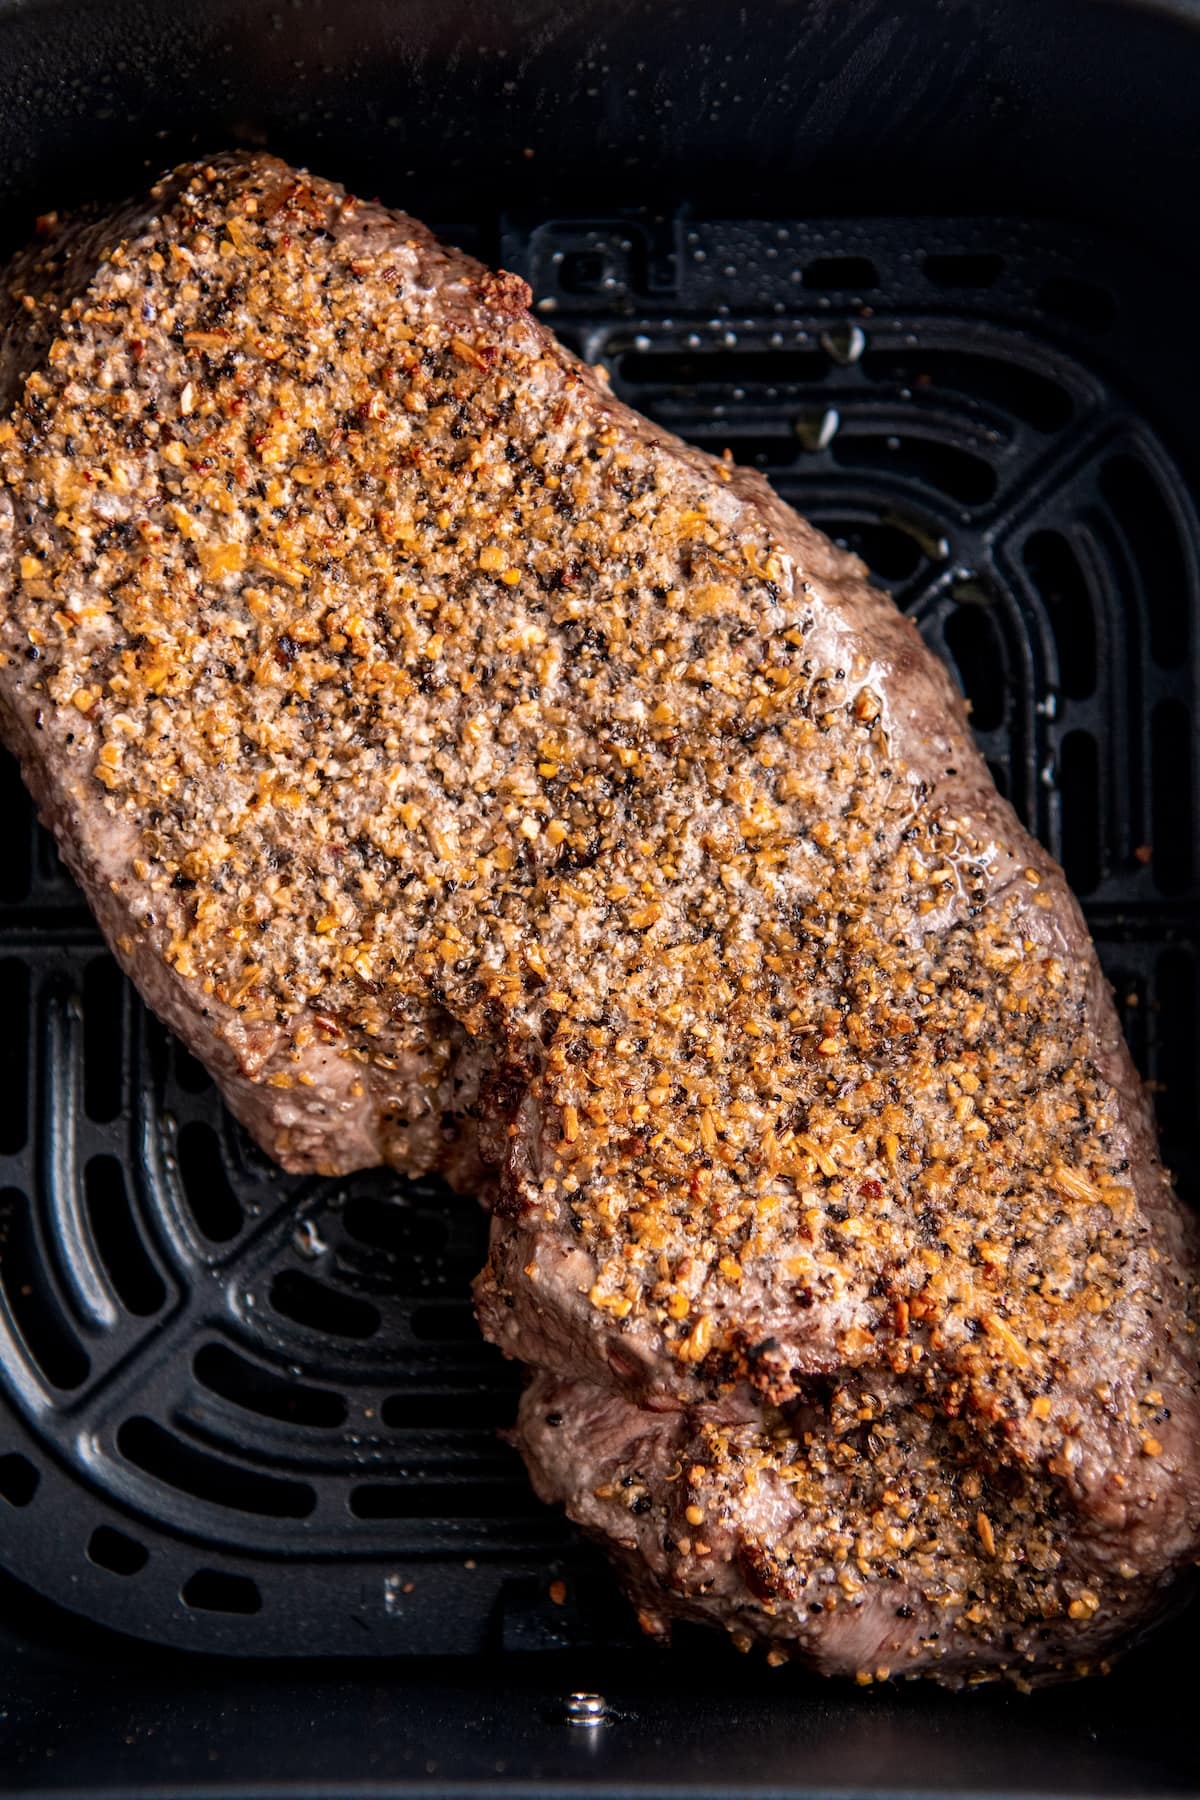 Cooked and seasoned steak in an air fryer tray